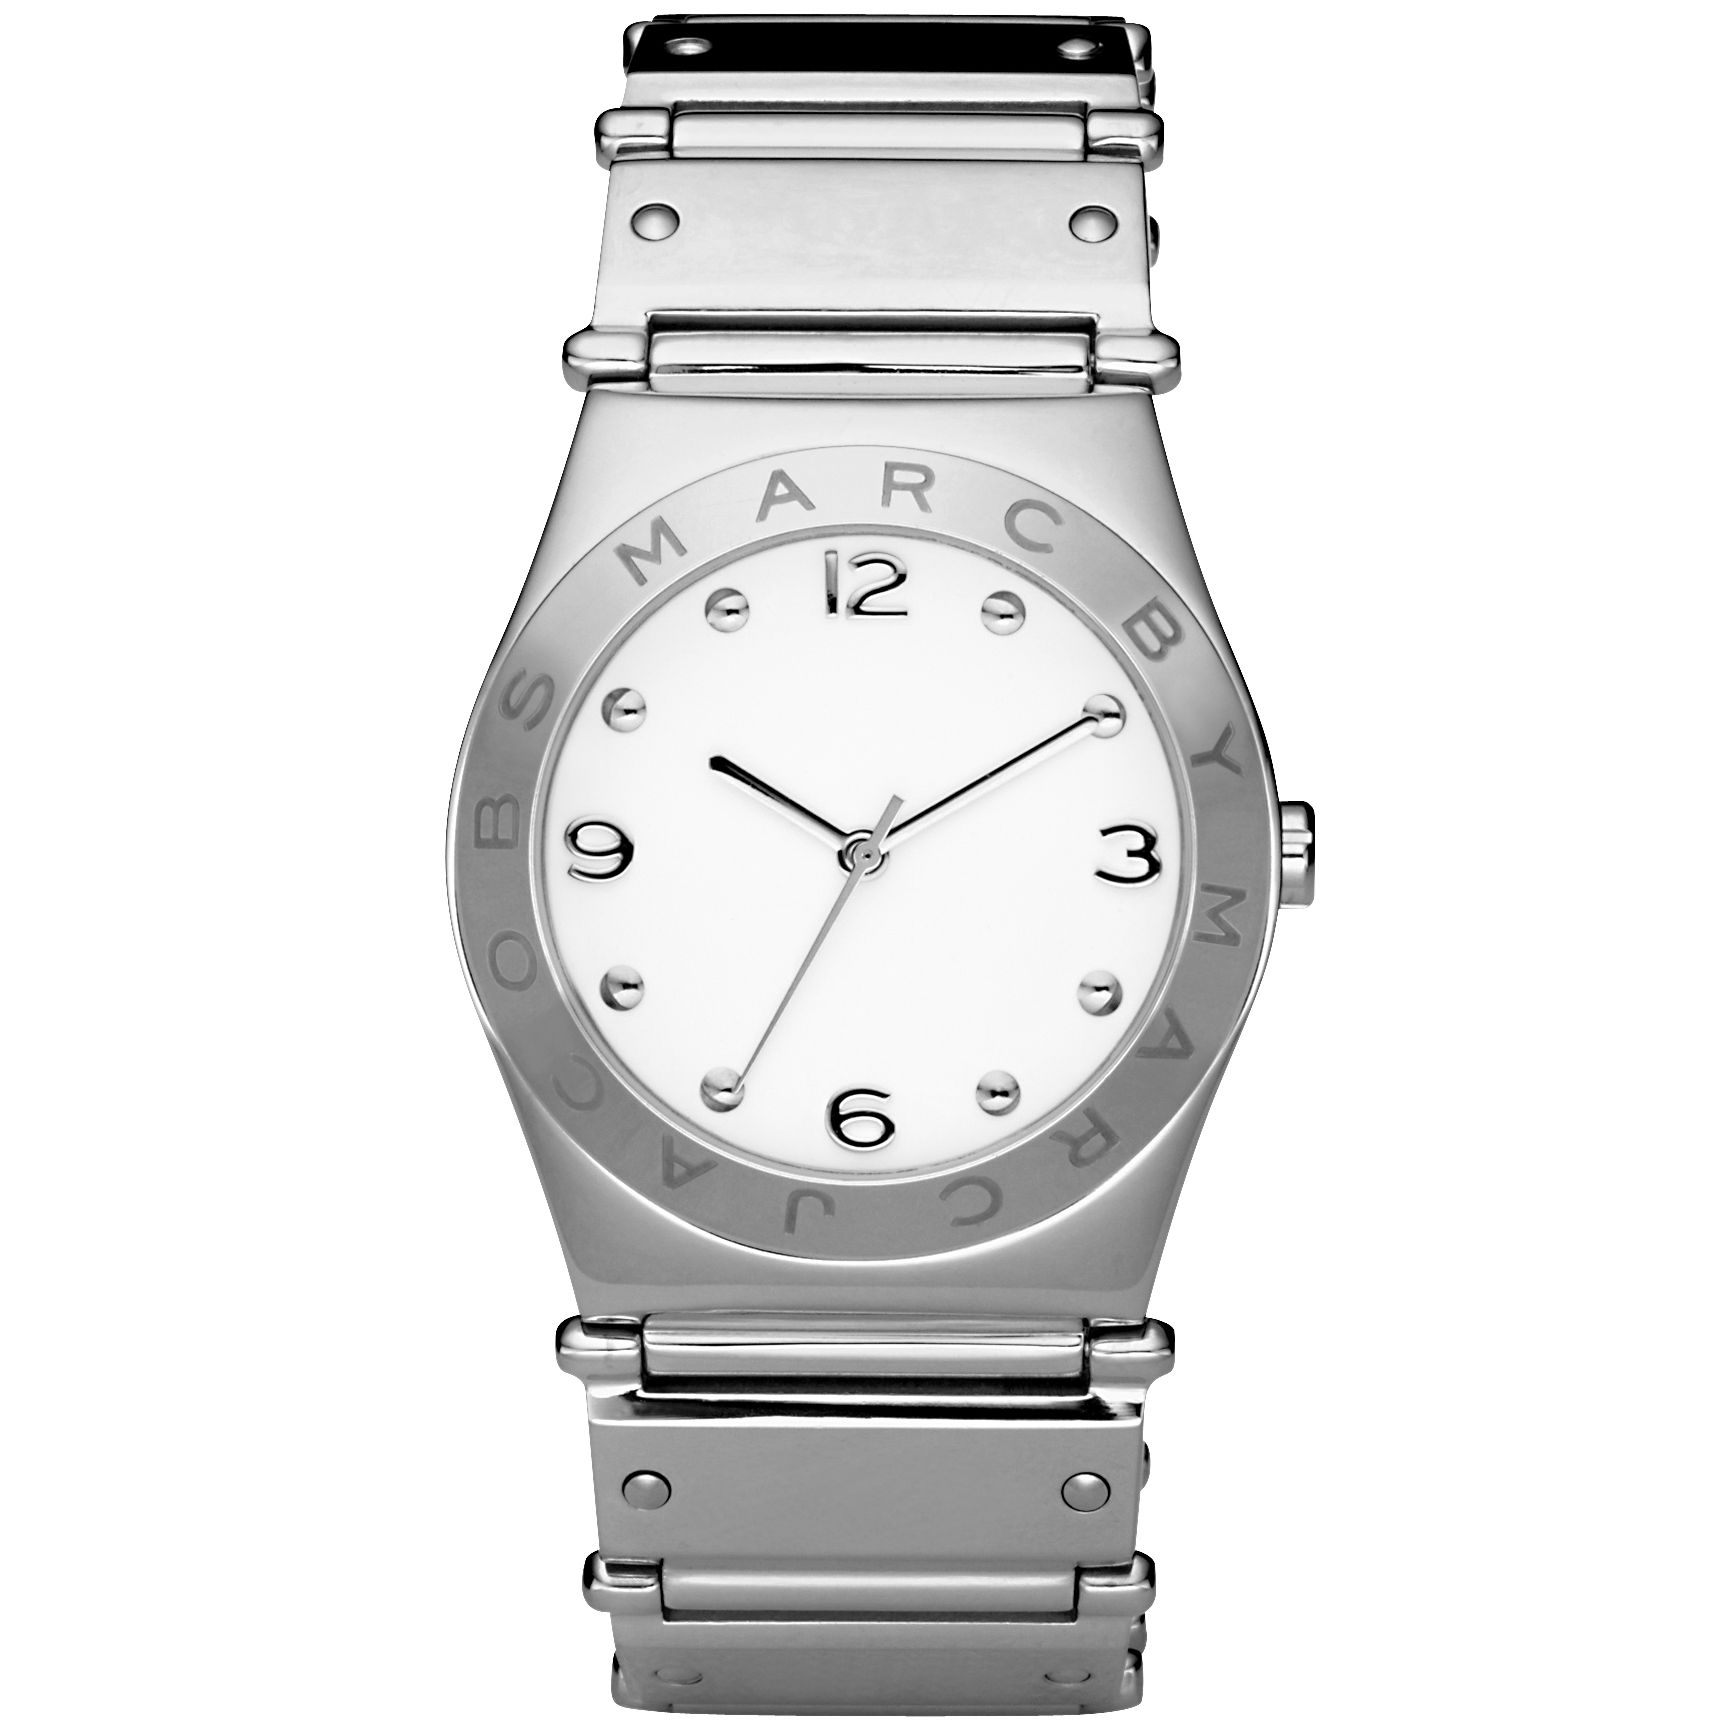 Marc by Marc Jacobs MBM8518 Women's Round White Glitz Index Dial Stainless Steel Bracelet Watch at John Lewis